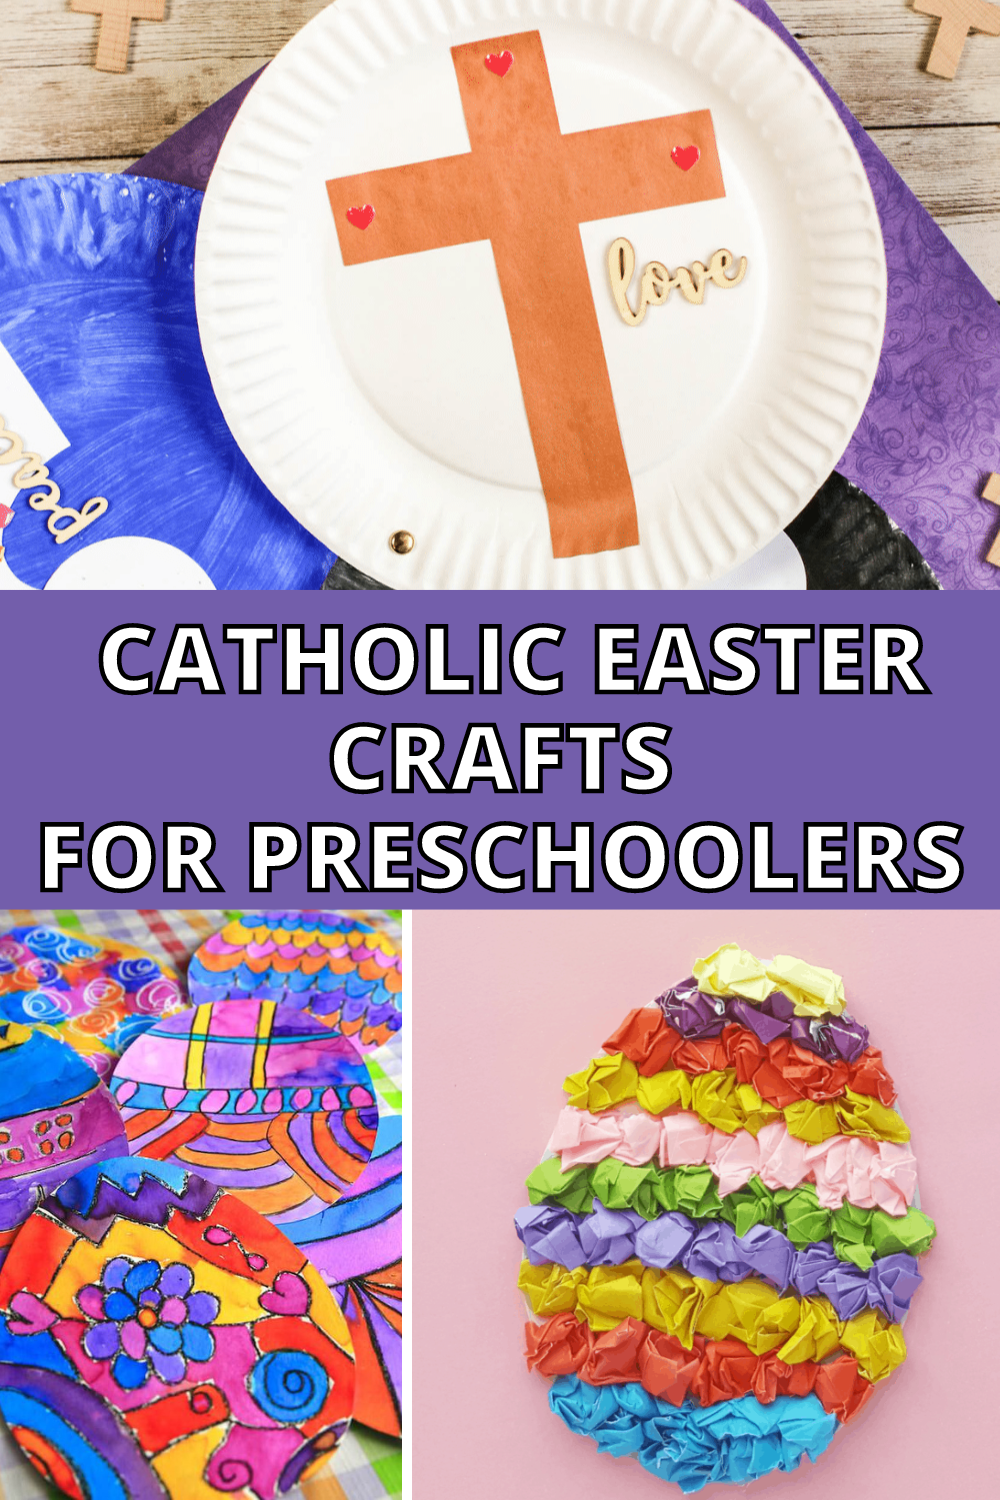 Catholic-Easter-crafts-for-preschoolers Catholic Easter Crafts for Preschoolers